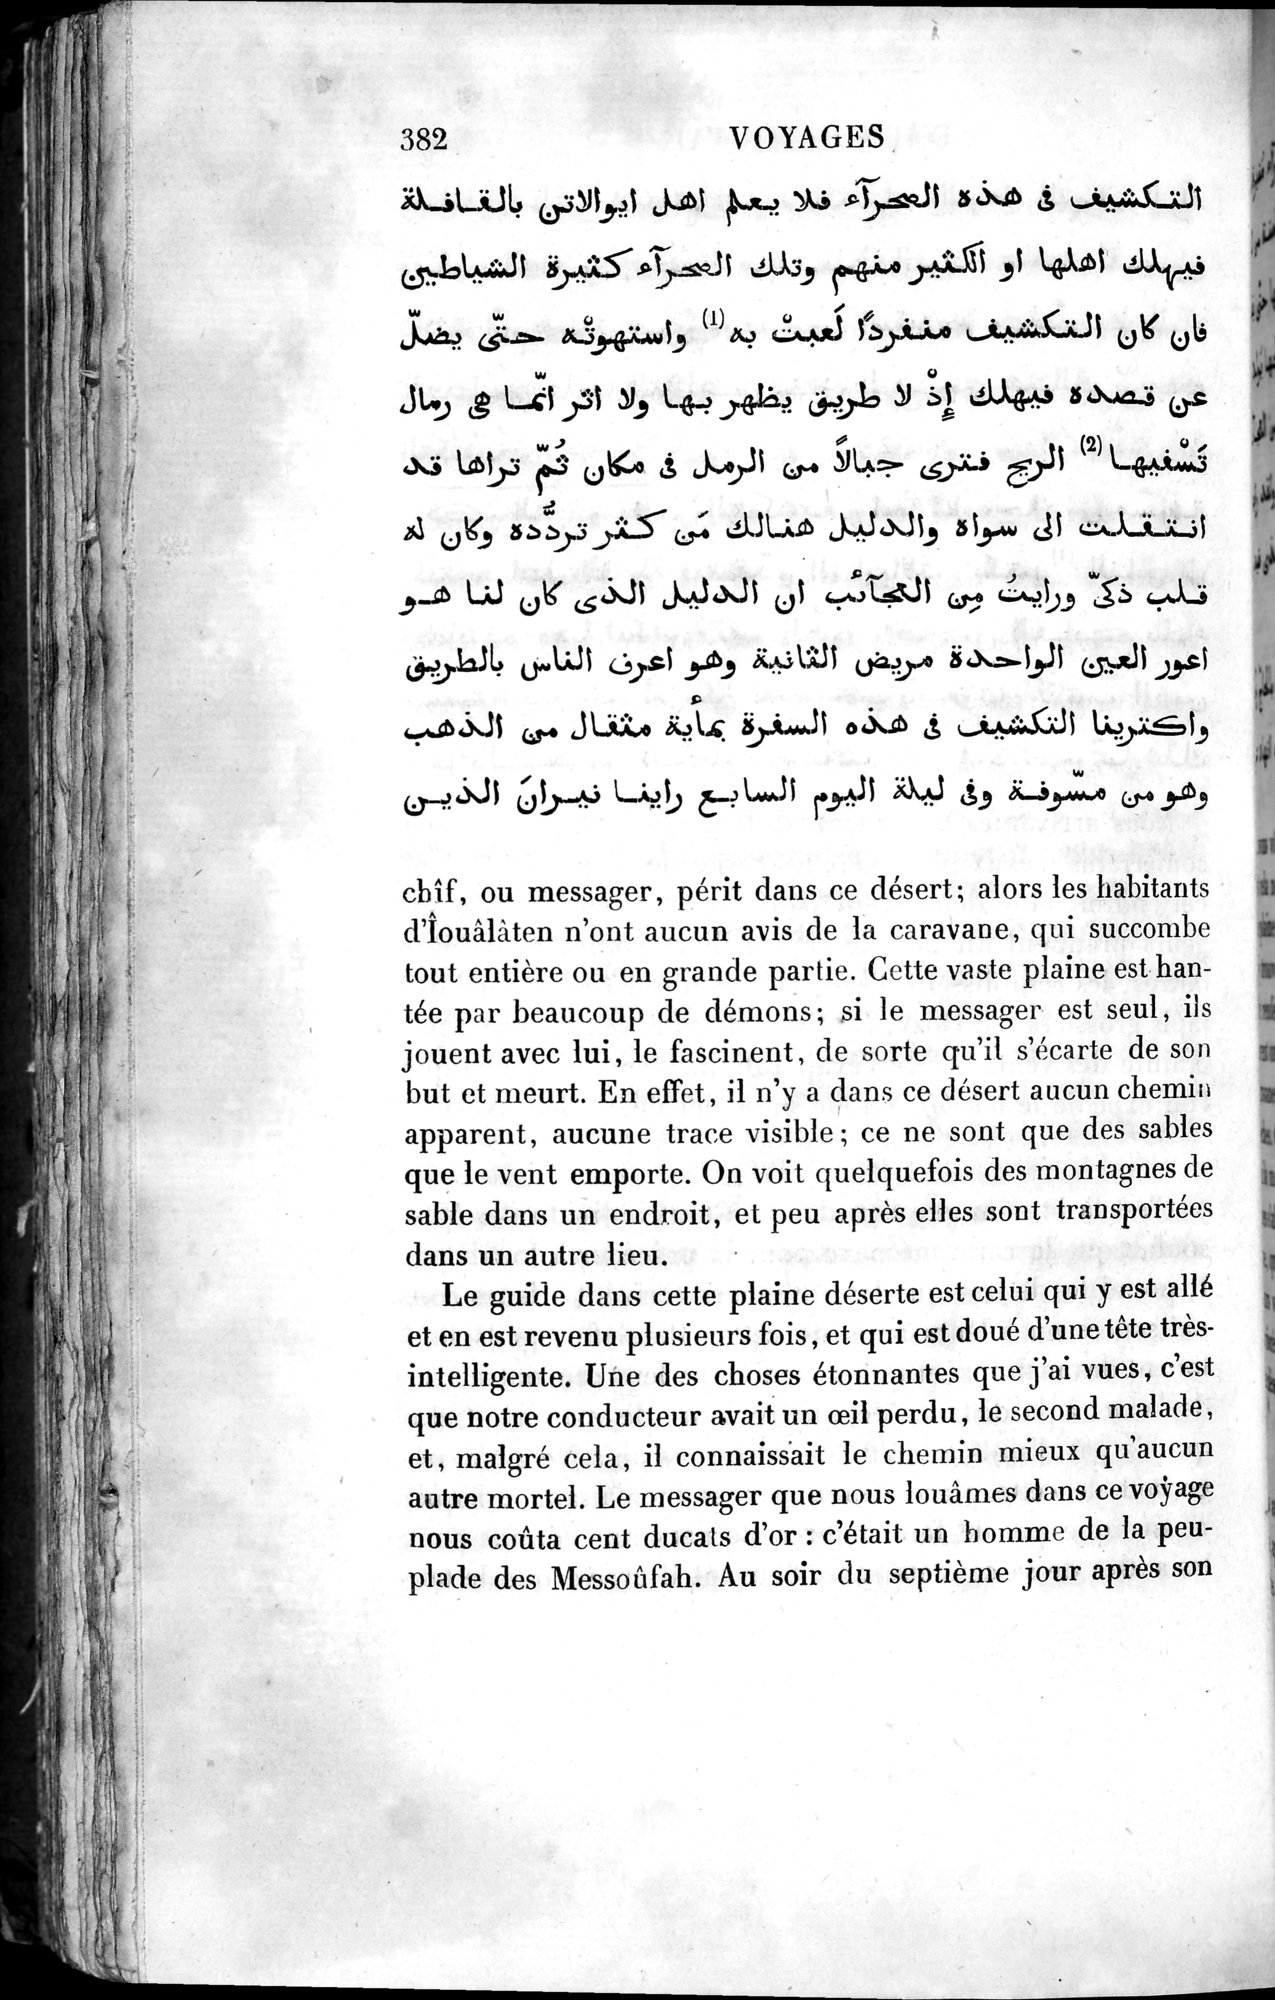 Voyages d'Ibn Batoutah : vol.4 / Page 394 (Grayscale High Resolution Image)